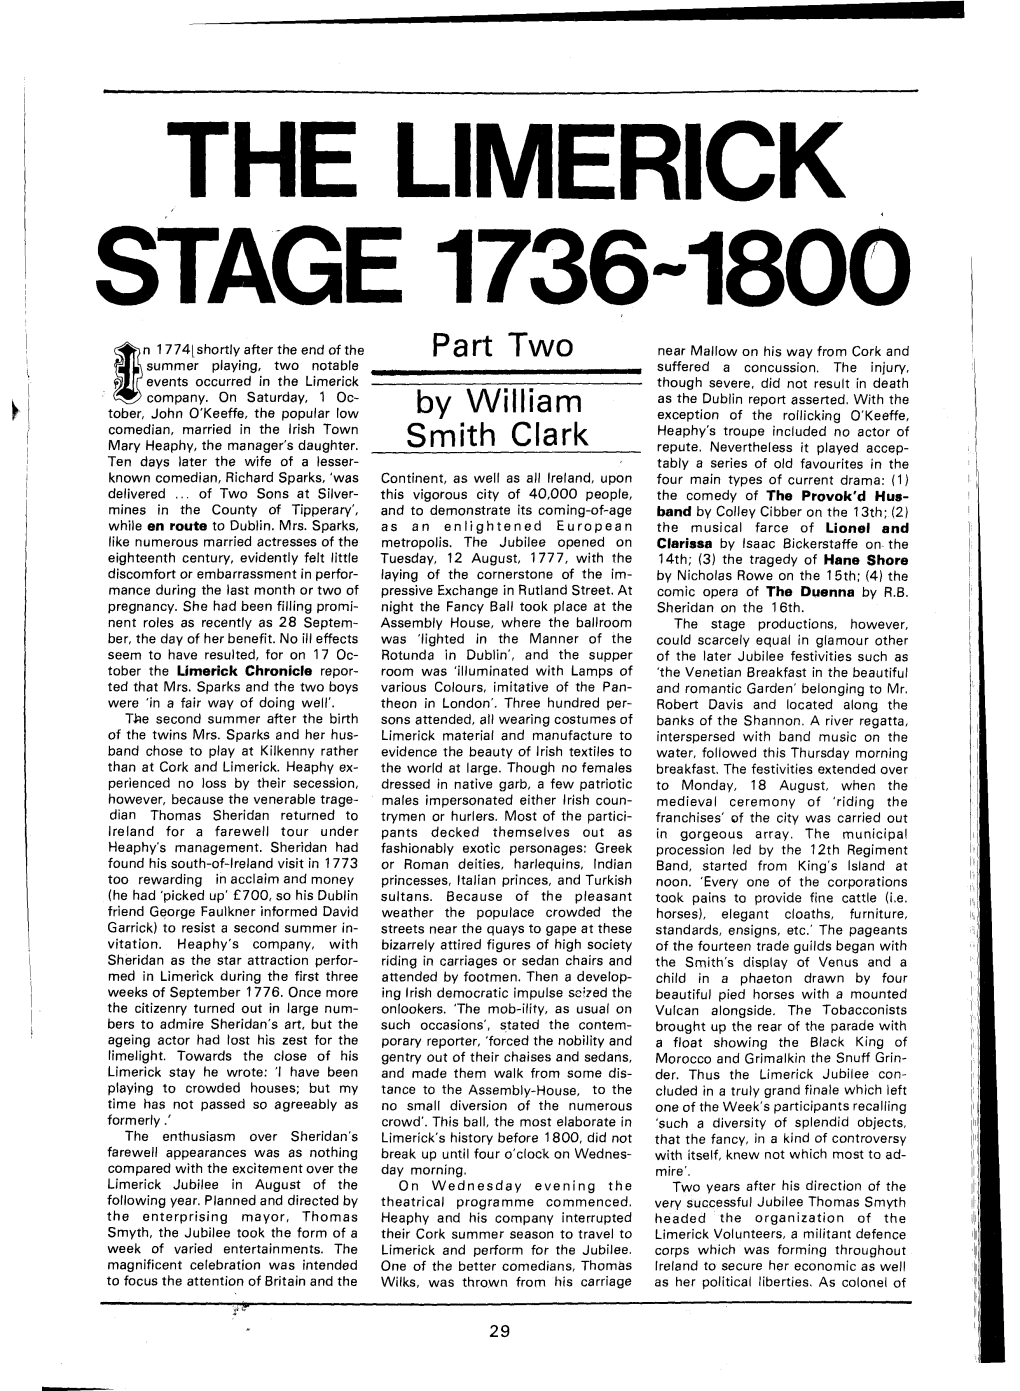 The Limerick Stage 1736-1800, Part Two by William Smith